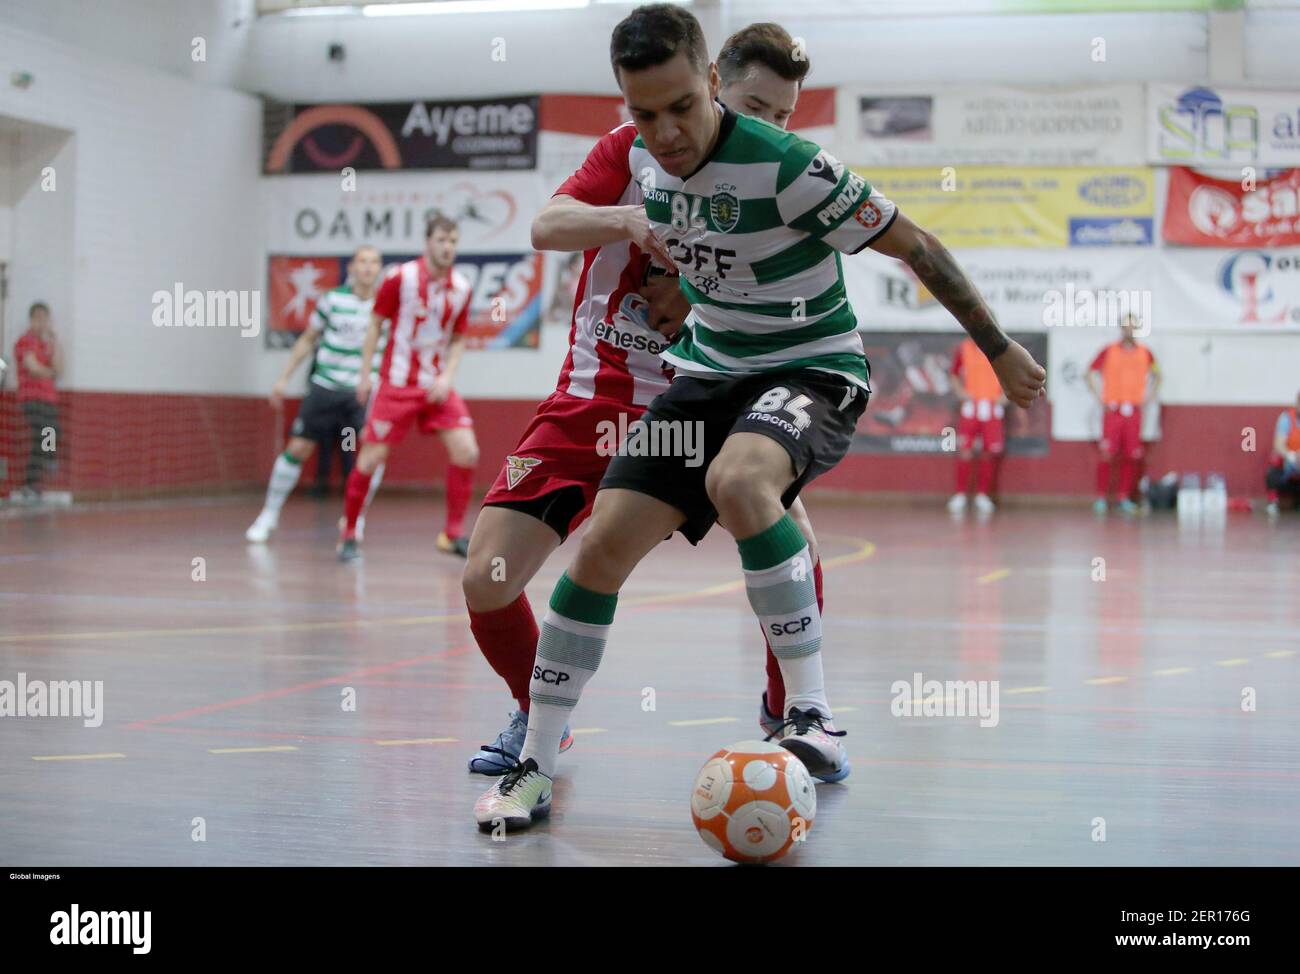 Vila das Aves, 10/03/2018 - The Clube Desportivo das Aves received this  afternoon the Sporting Clube de Portugal in the CD Aves Pavilion in game to  count for the 20th day of